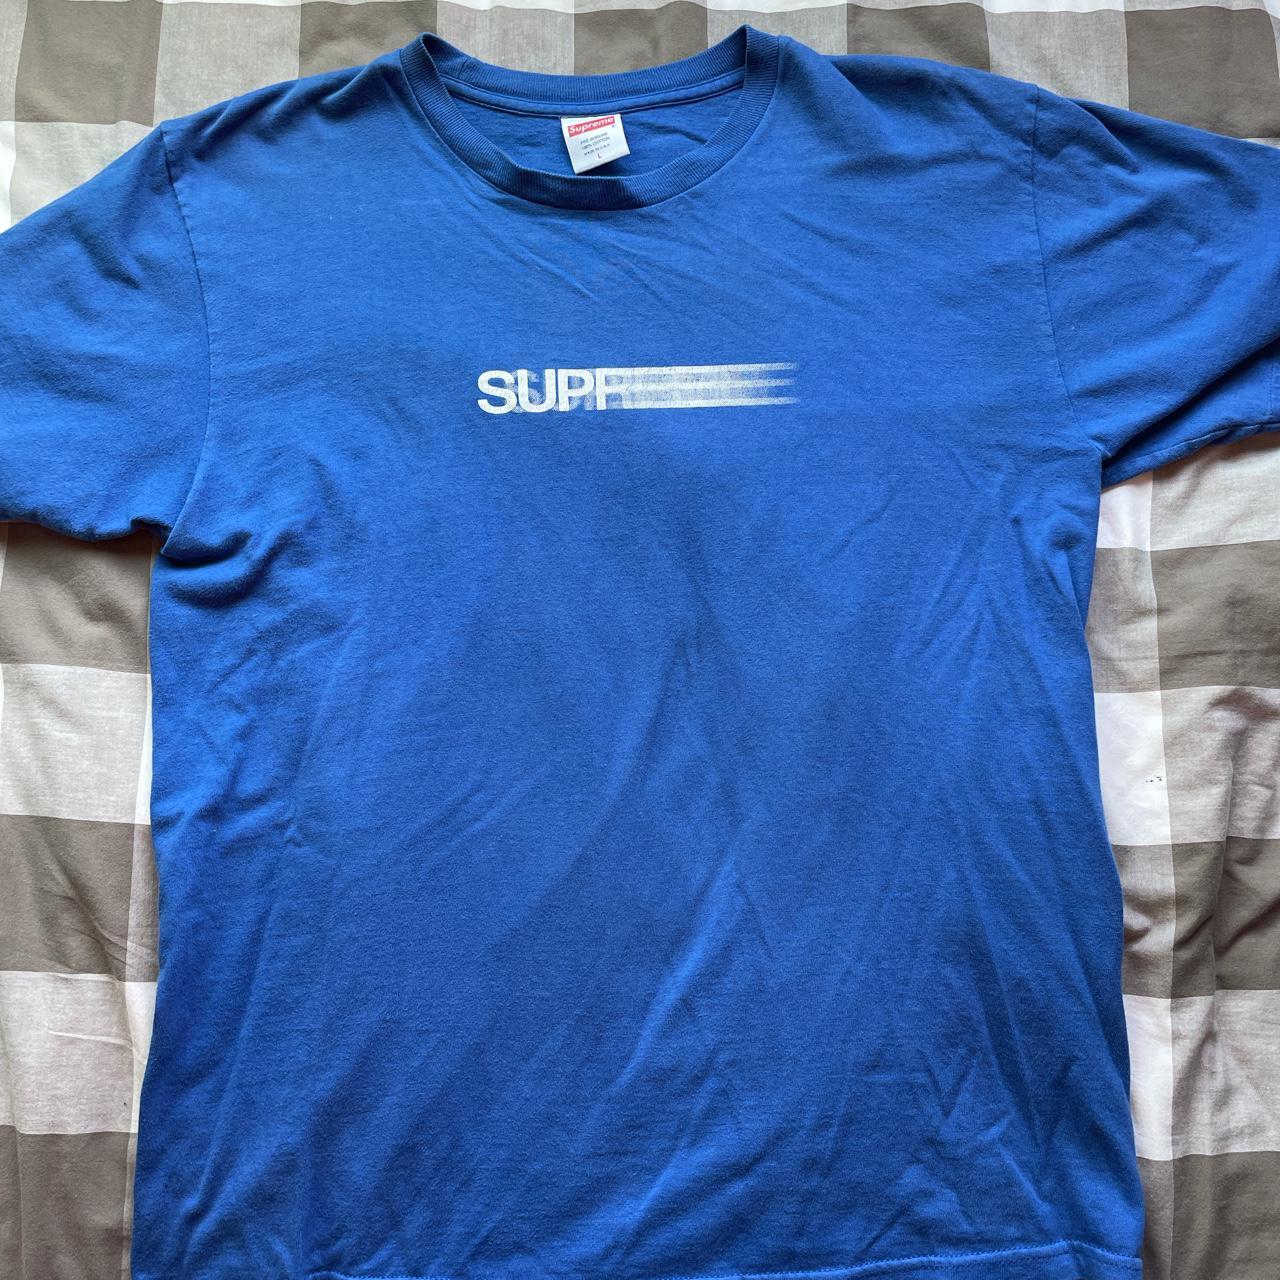 Supreme motion blur ss16 royal blue used and... - Depop